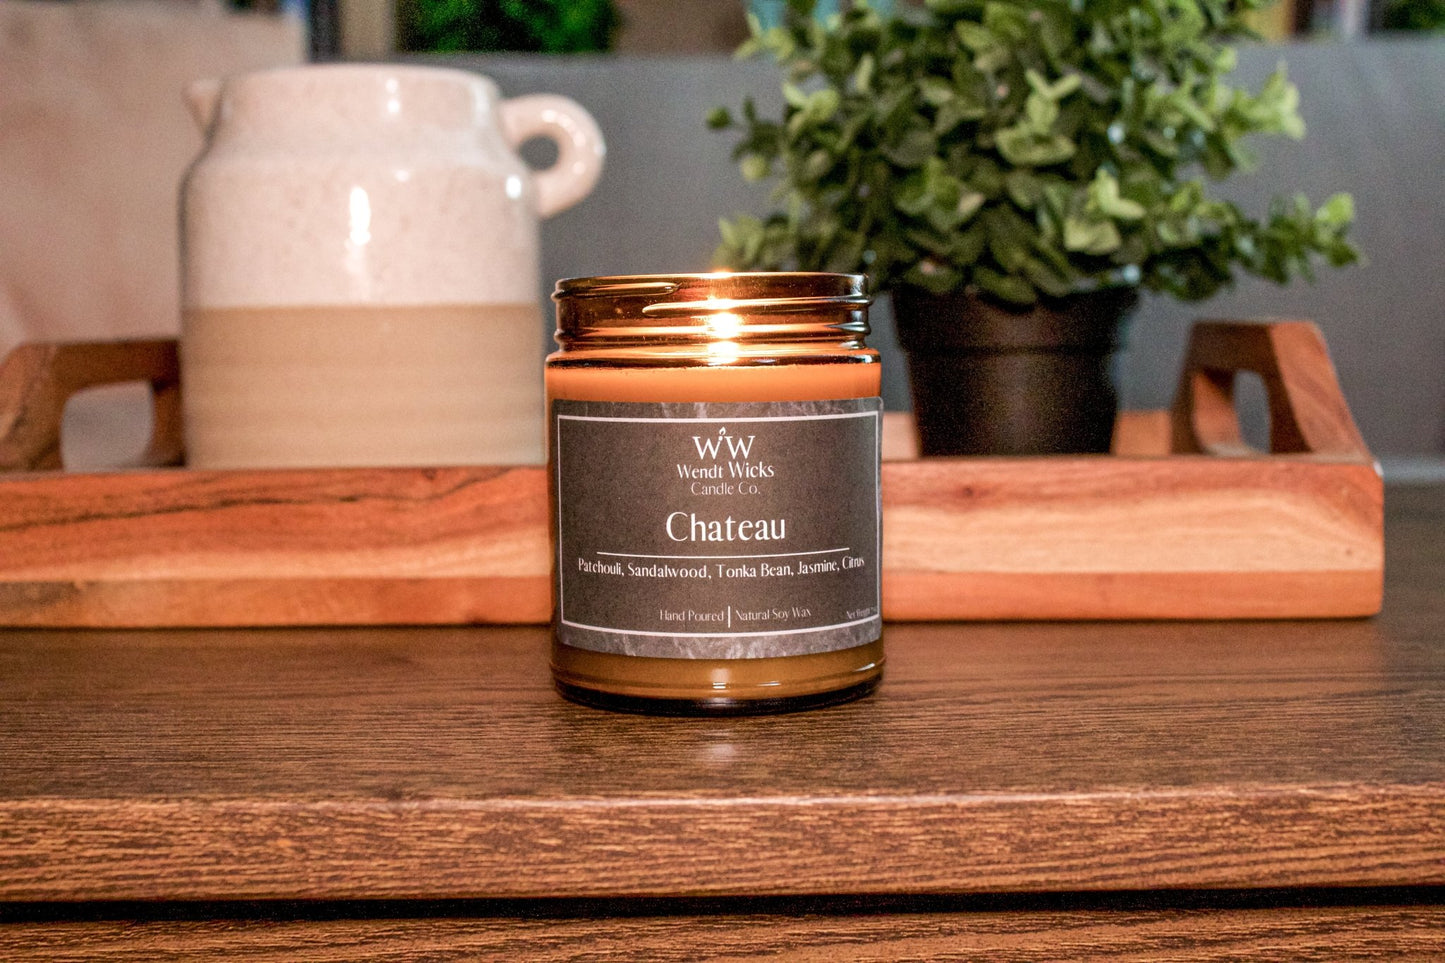 Chateau - Wendt Wicks Candle Co. - Amber candle